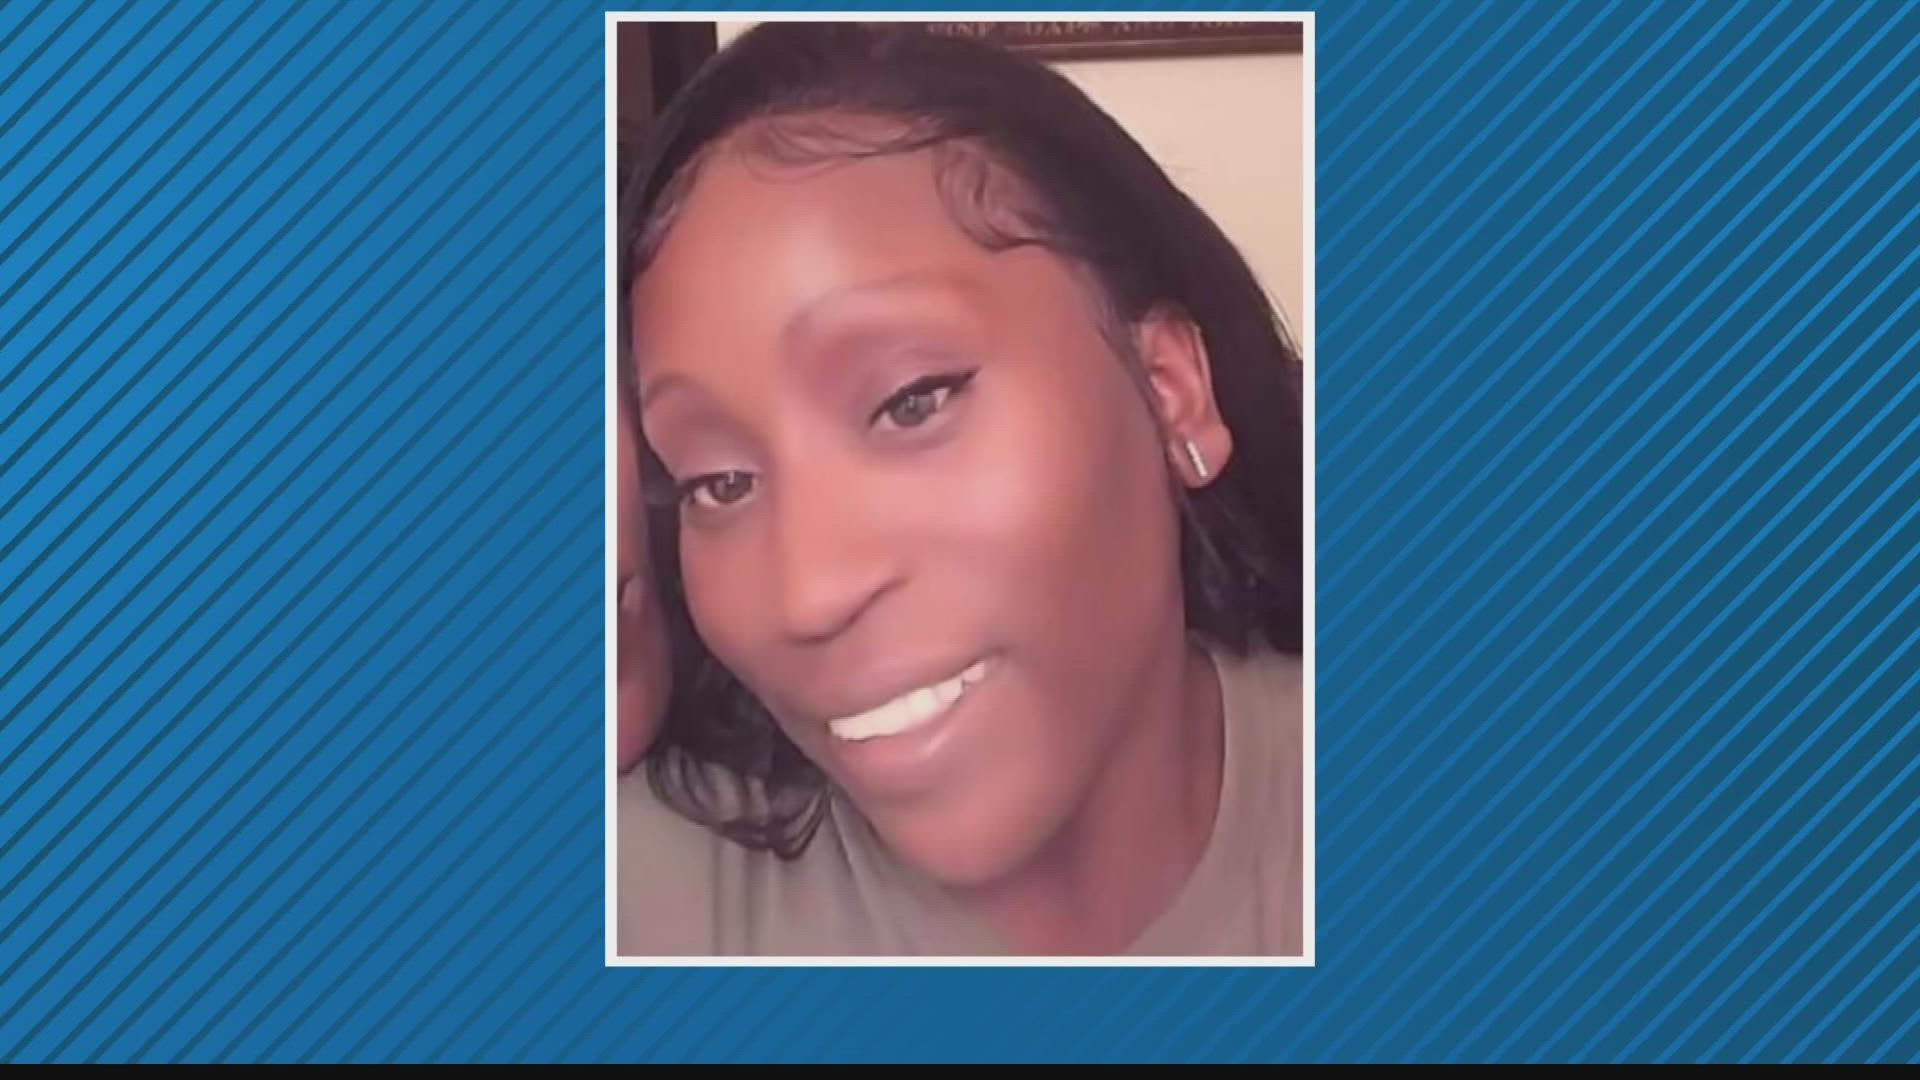 Latoya James died during a shootout last may. The Sheriff's Office was carrying out a drug-related search warrant at her cousin's home in Woodbine.